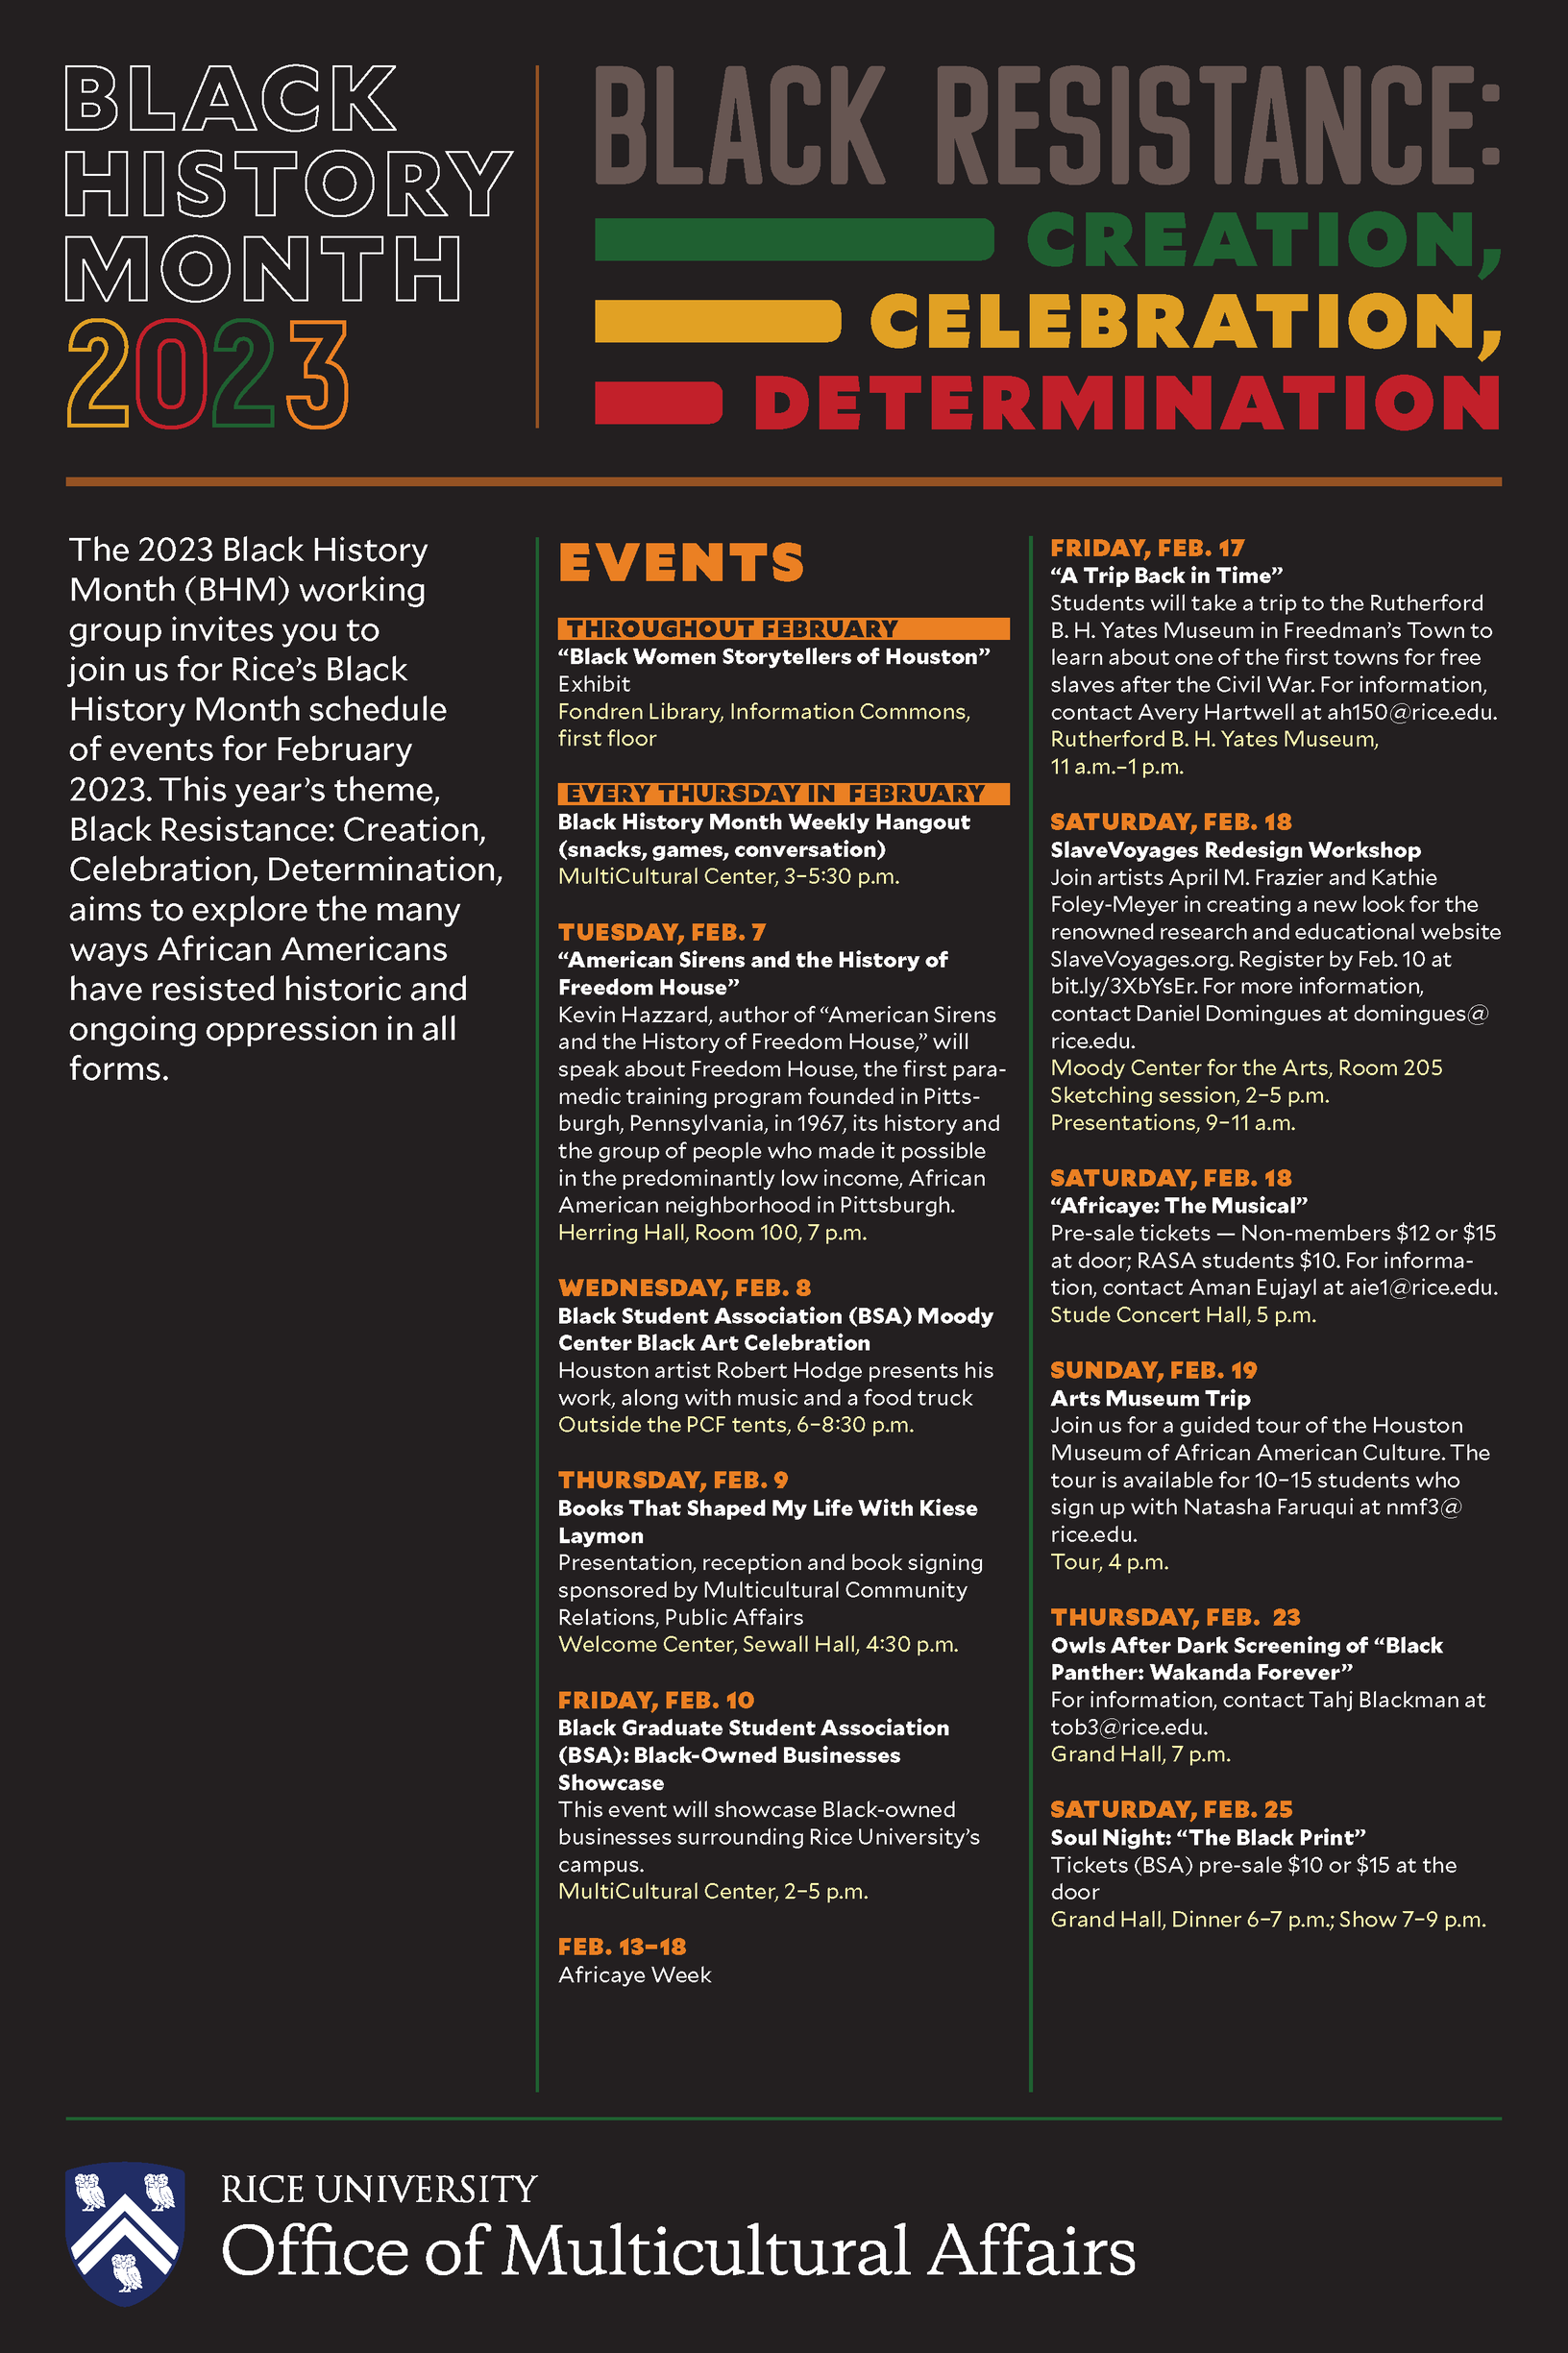 2023 Black History Month Schedule of events at Rice University.